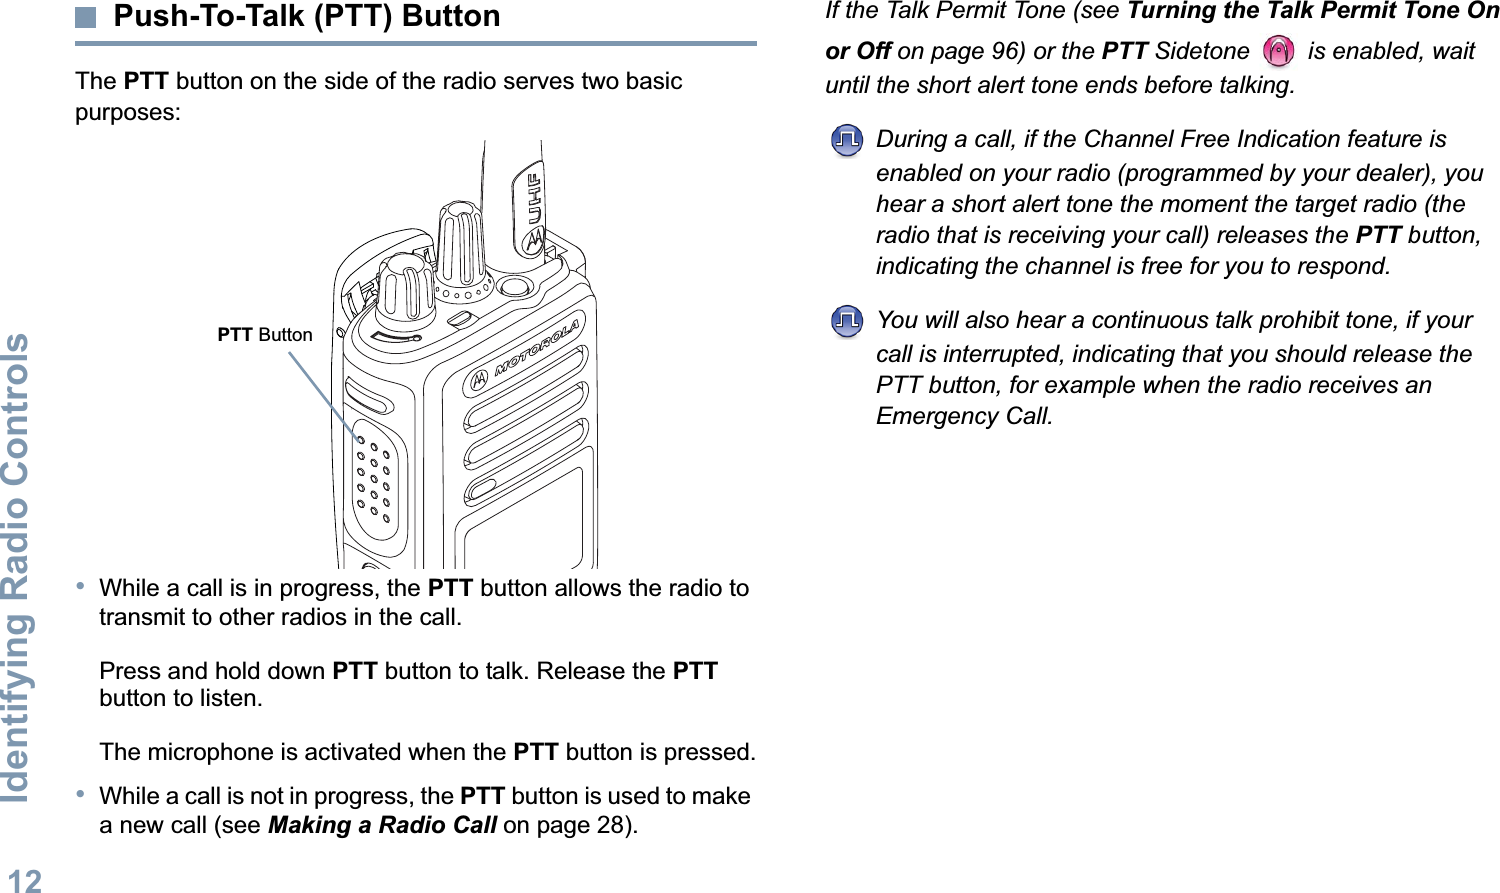 Identifying Radio ControlsEnglish12Push-To-Talk (PTT) ButtonThe PTT button on the side of the radio serves two basic purposes:•While a call is in progress, the PTT button allows the radio to transmit to other radios in the call.Press and hold down PTT button to talk. Release the PTT button to listen.The microphone is activated when the PTT button is pressed.•While a call is not in progress, the PTT button is used to make a new call (see Making a Radio Call on page 28).If the Talk Permit Tone (see Turning the Talk Permit Tone On or Off on page 96) or the PTT Sidetone   is enabled, wait until the short alert tone ends before talking.During a call, if the Channel Free Indication feature is enabled on your radio (programmed by your dealer), you hear a short alert tone the moment the target radio (the radio that is receiving your call) releases the PTT button, indicating the channel is free for you to respond.You will also hear a continuous talk prohibit tone, if your call is interrupted, indicating that you should release the PTT button, for example when the radio receives an Emergency Call.PTT Button